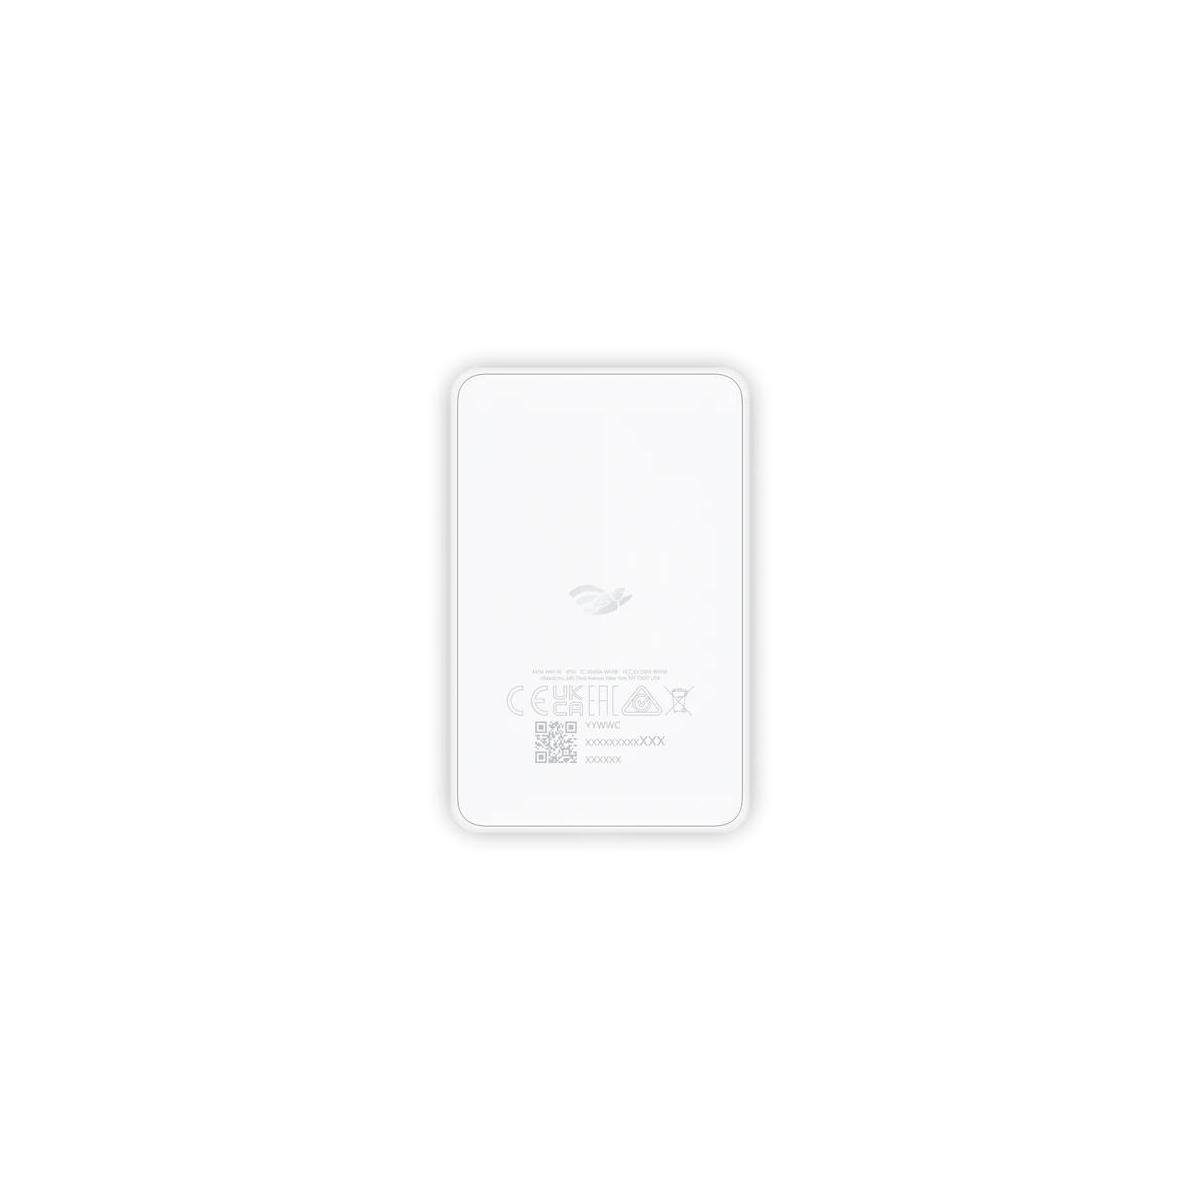 Ubiquiti Networks WiFiMan-Assistent WLAN-Antenne